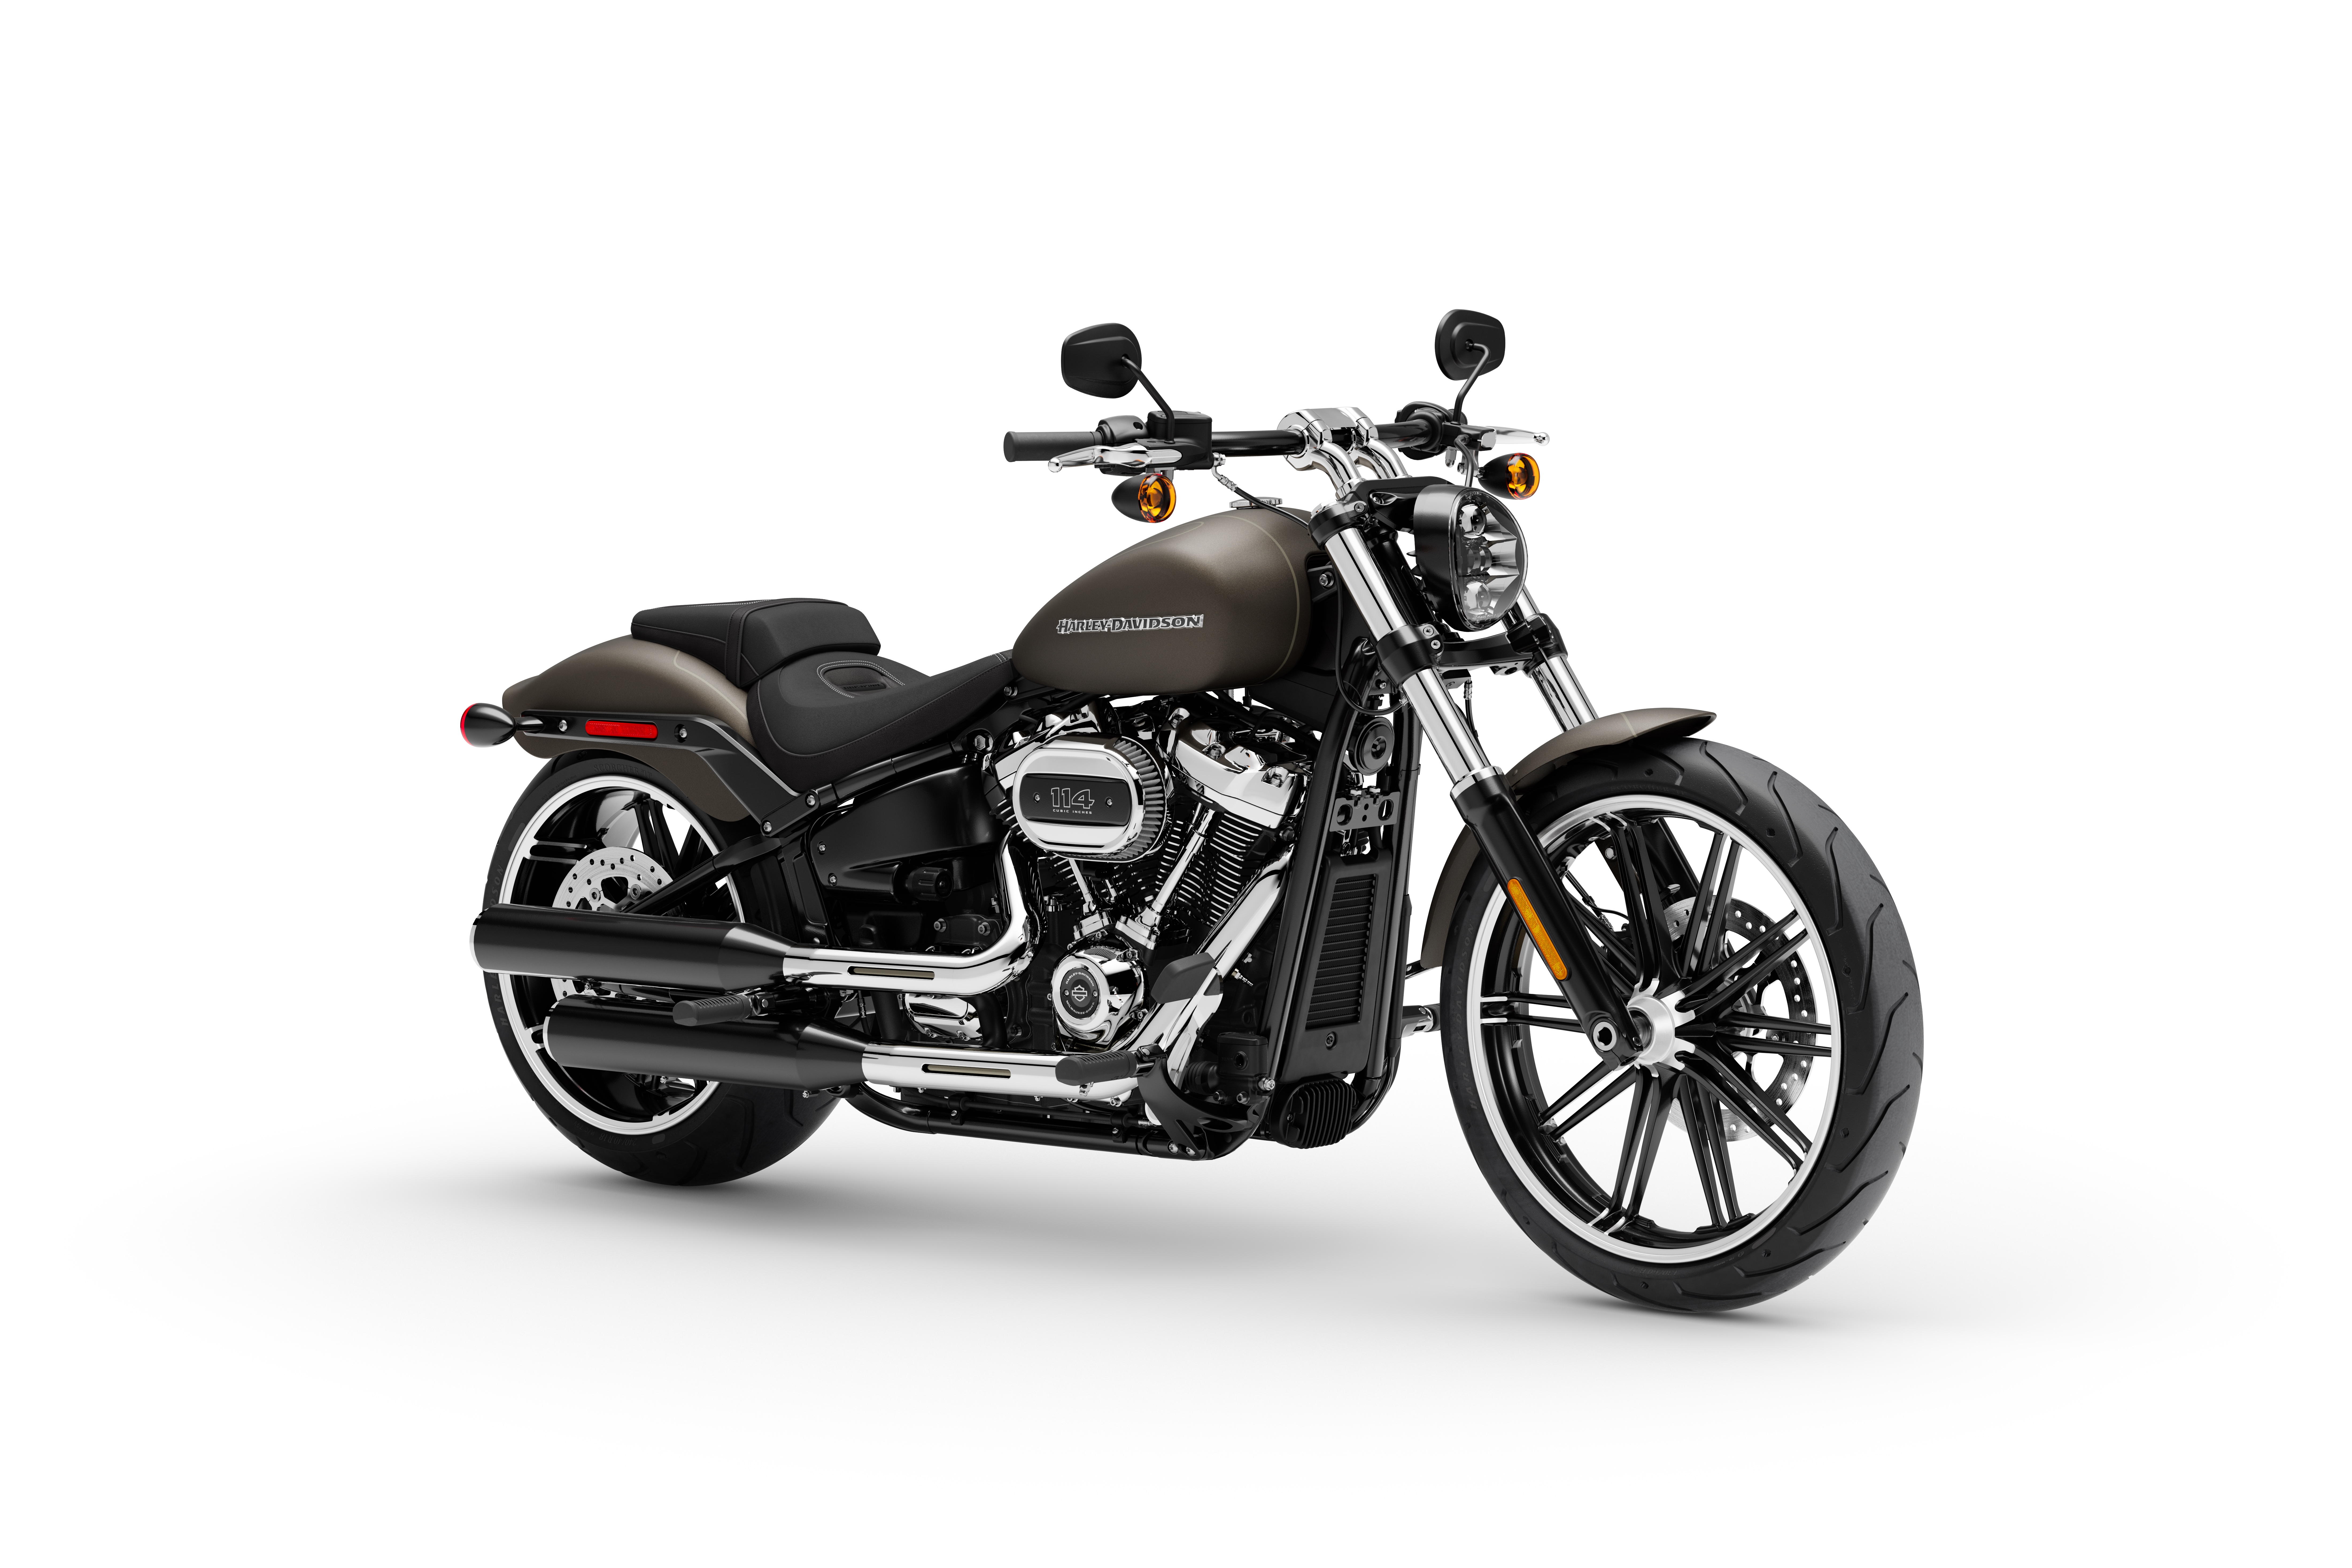 mineral salami moden 2020 Harley-Davidson Breakout 114 Buyer's Guide: Specs, Photos, Price |  Cycle World